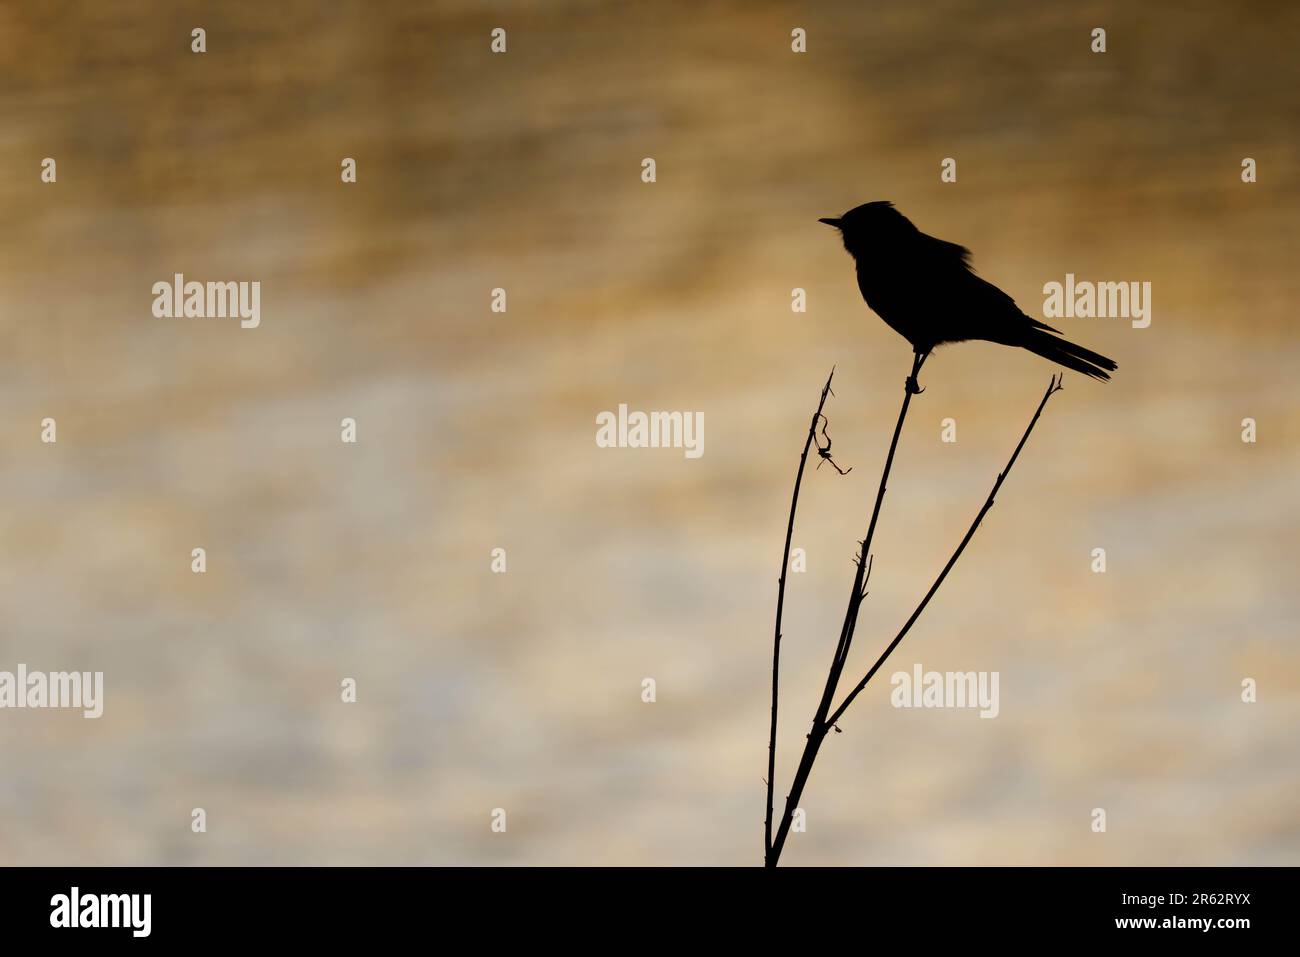 Say's Phoebe, Bosque del Apache National Wildlife Refuge, New Mexico, USA. Stock Photo